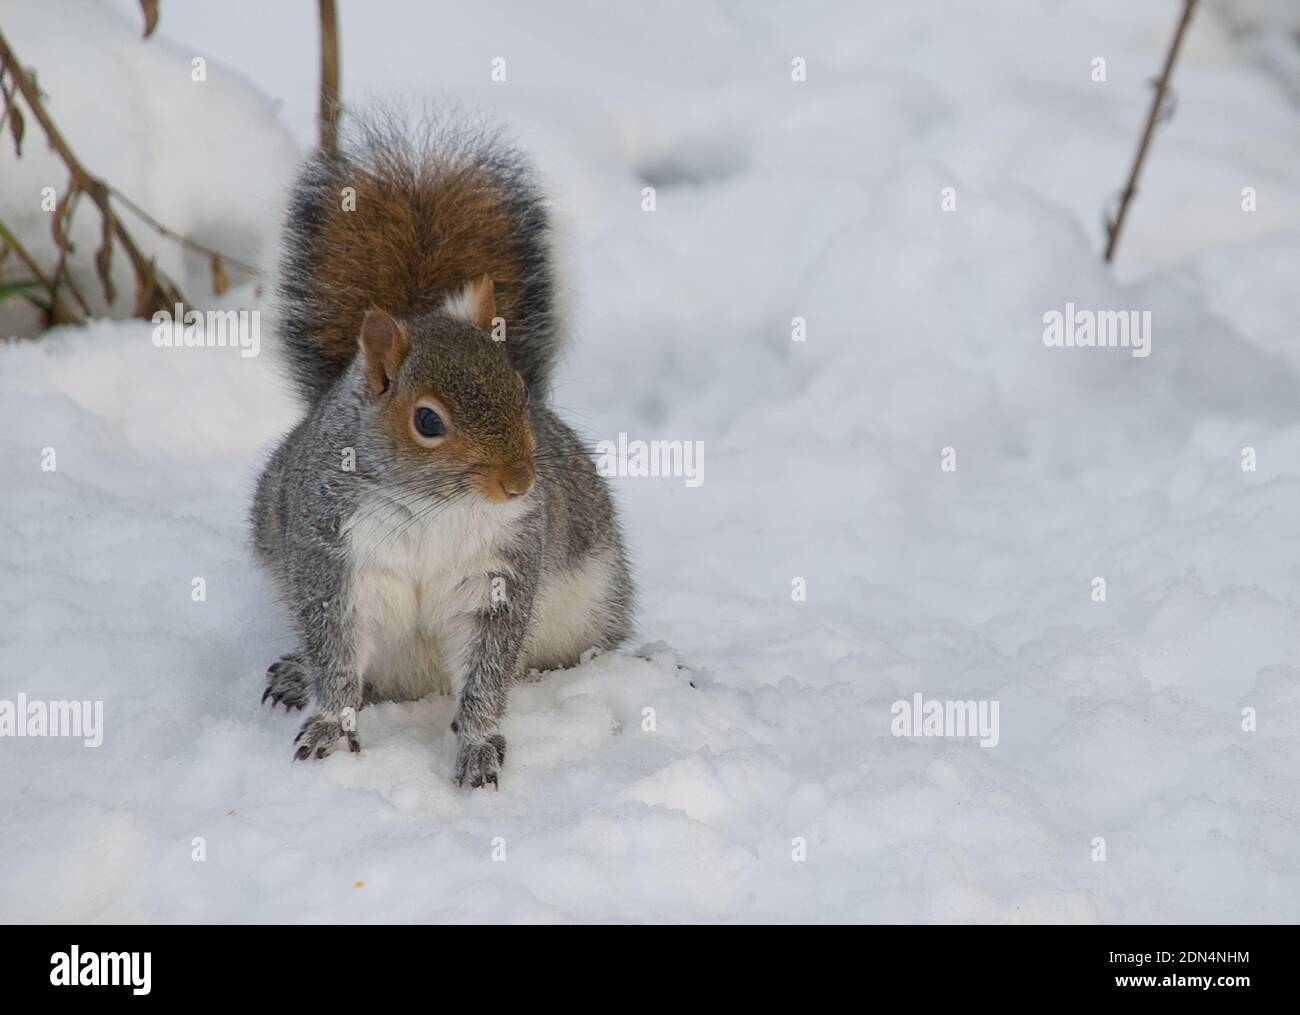 Close up of grey squirrel attentive and alert on all fours in crisp, thick freshly fallen snow Stock Photo